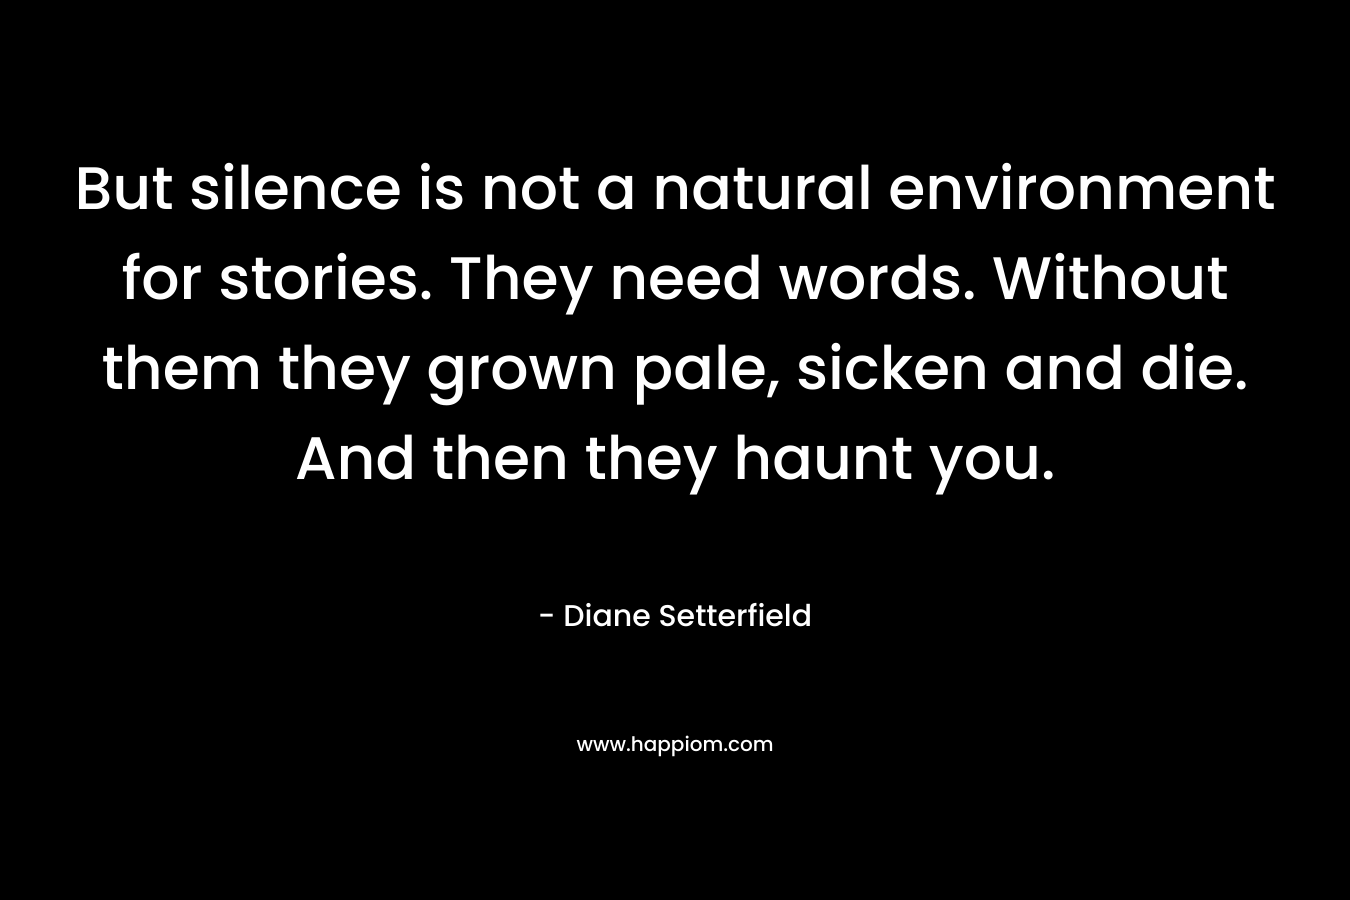 But silence is not a natural environment for stories. They need words. Without them they grown pale, sicken and die. And then they haunt you. – Diane Setterfield